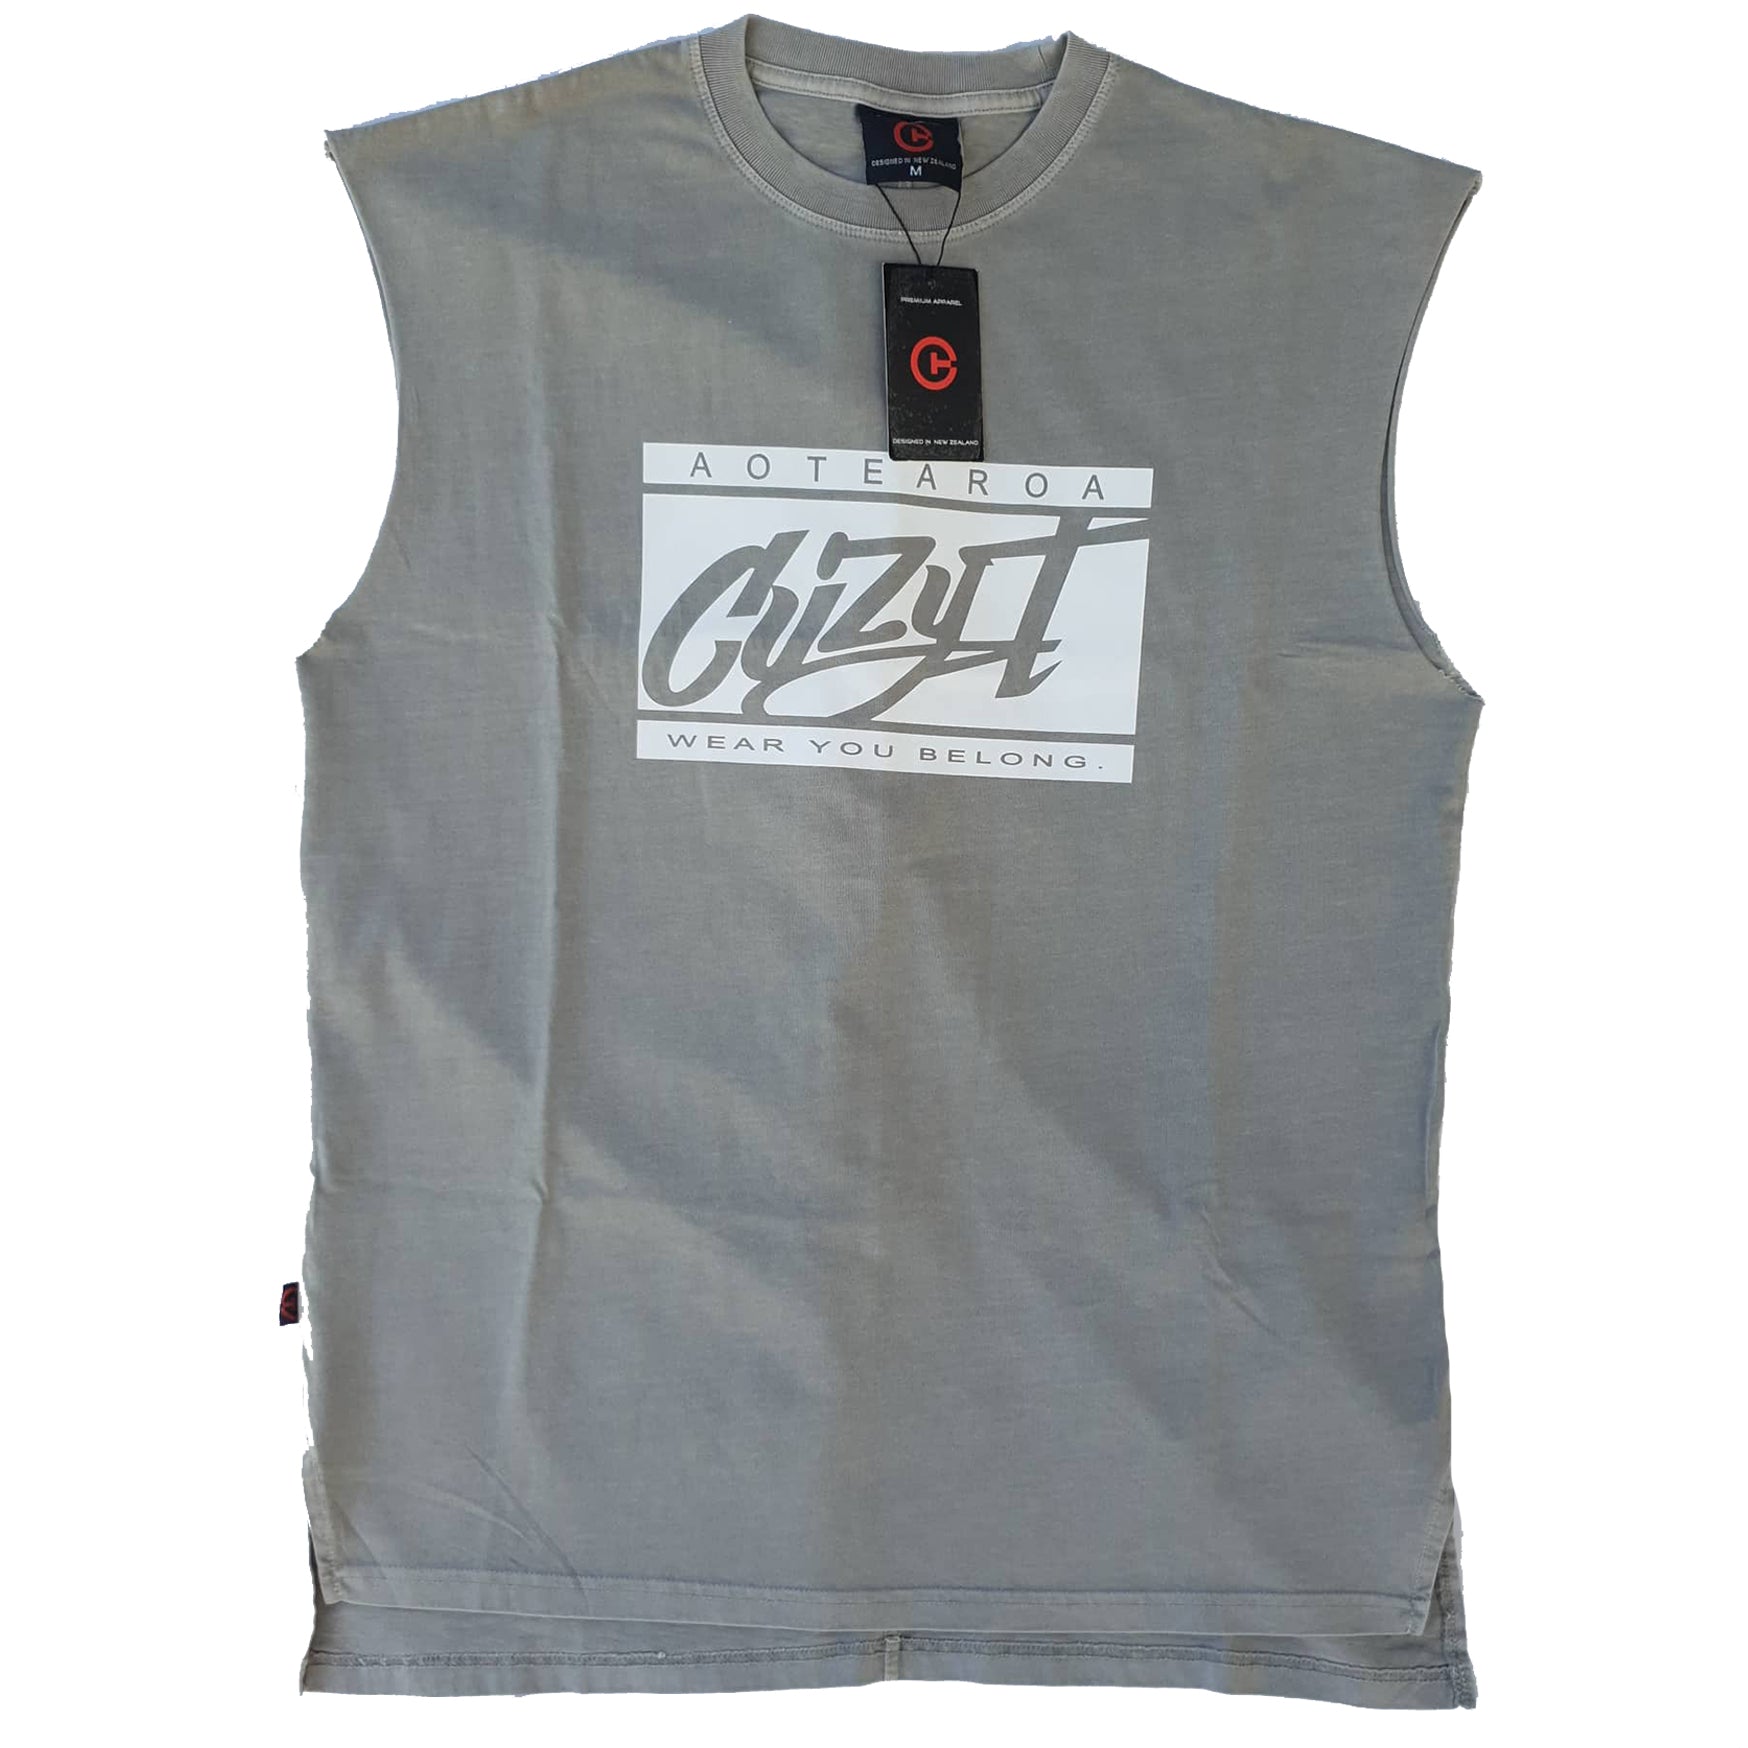 Muscle Tee - White on Grey - Cuzy T Apparel